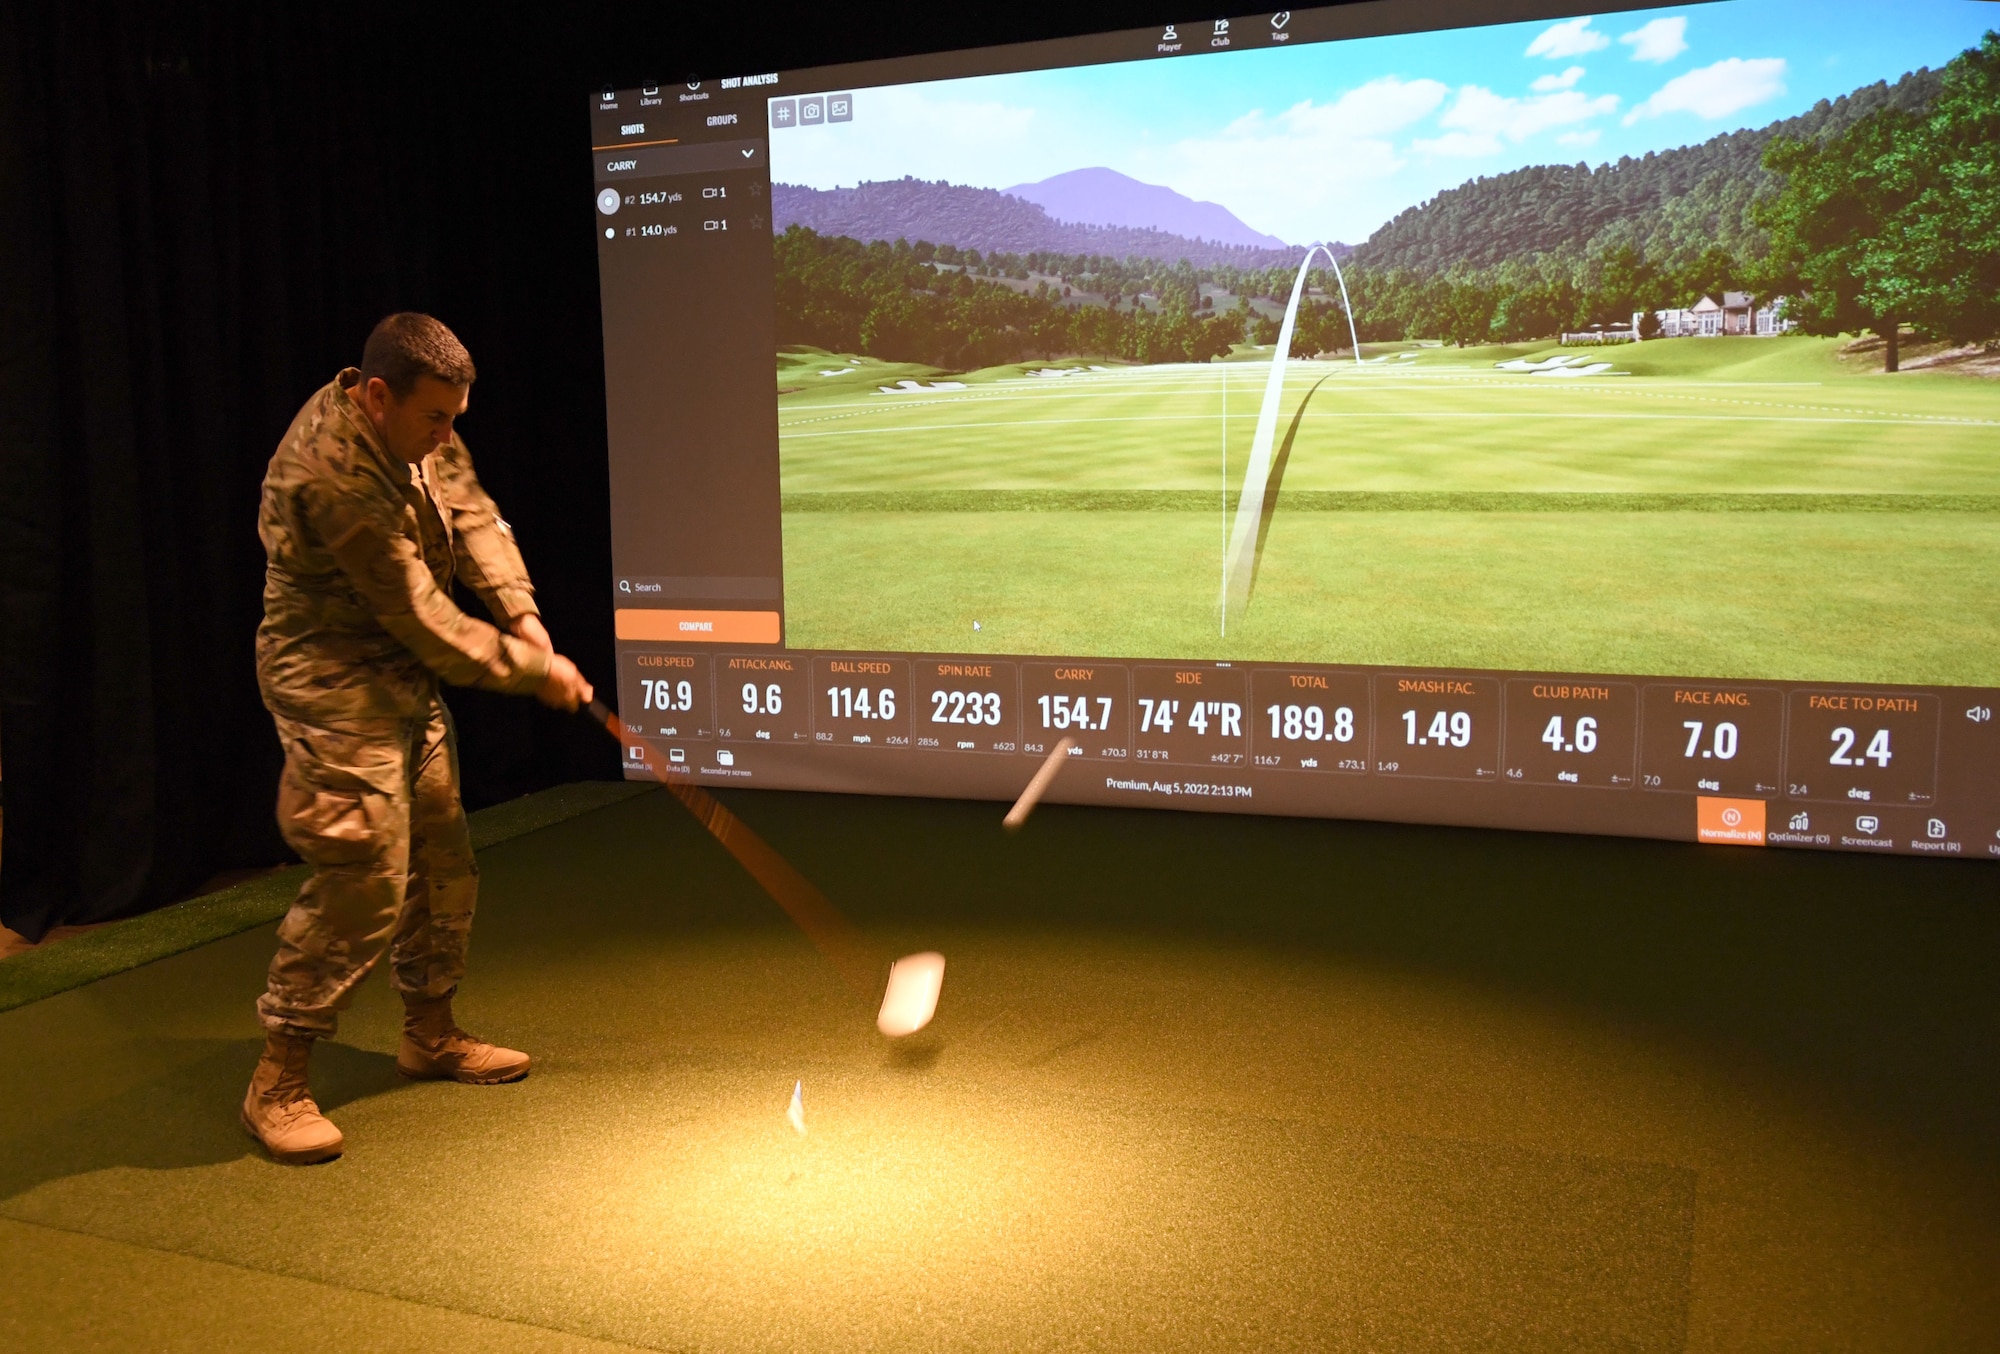 U.S. Air Force Col. Jason Allen, 81st Training Wing vice commander, takes a swing during the Indoor Golf Simulator ribbon cutting ceremony outside the Bay Breeze Event Center at Keesler Air Force Base, Mississippi, Aug. 5, 2022. The simulator has the latest golf shot tracking technology and allows the virtual play on over 250 famous golf courses worldwide. (U.S. Air Force photo by Kemberly Groue)